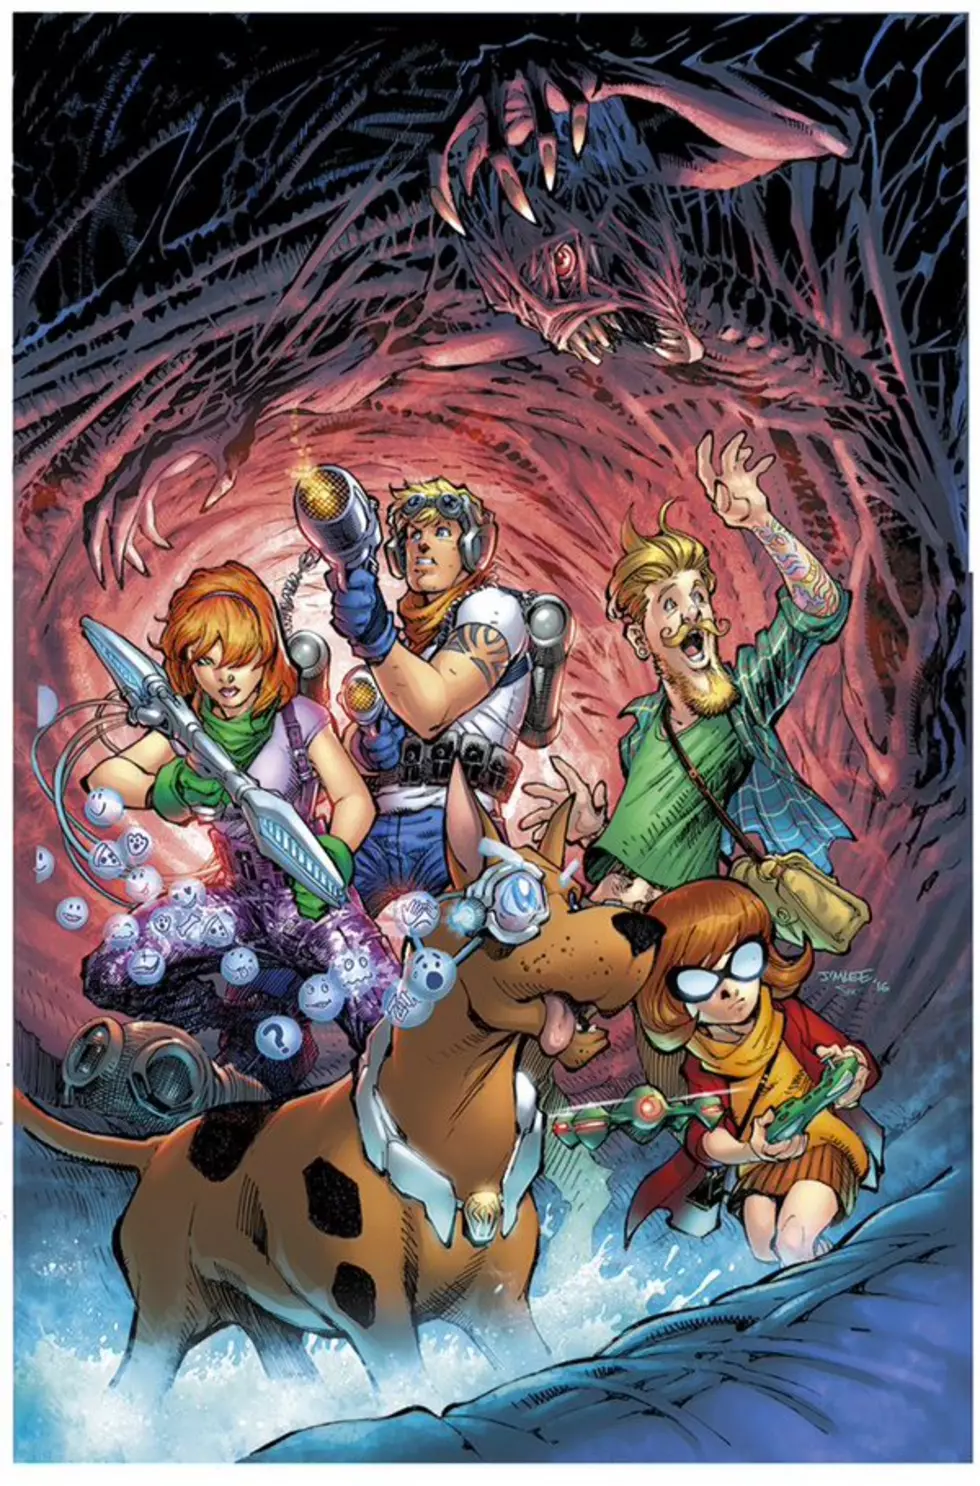 DC Announces A Slate Of New Hanna-Barbera Titles, Including &#8216;Scooby-Doo Apocalypse&#8217; And Parker And Shaner&#8217;s &#8216;Space Ghost&#8217;